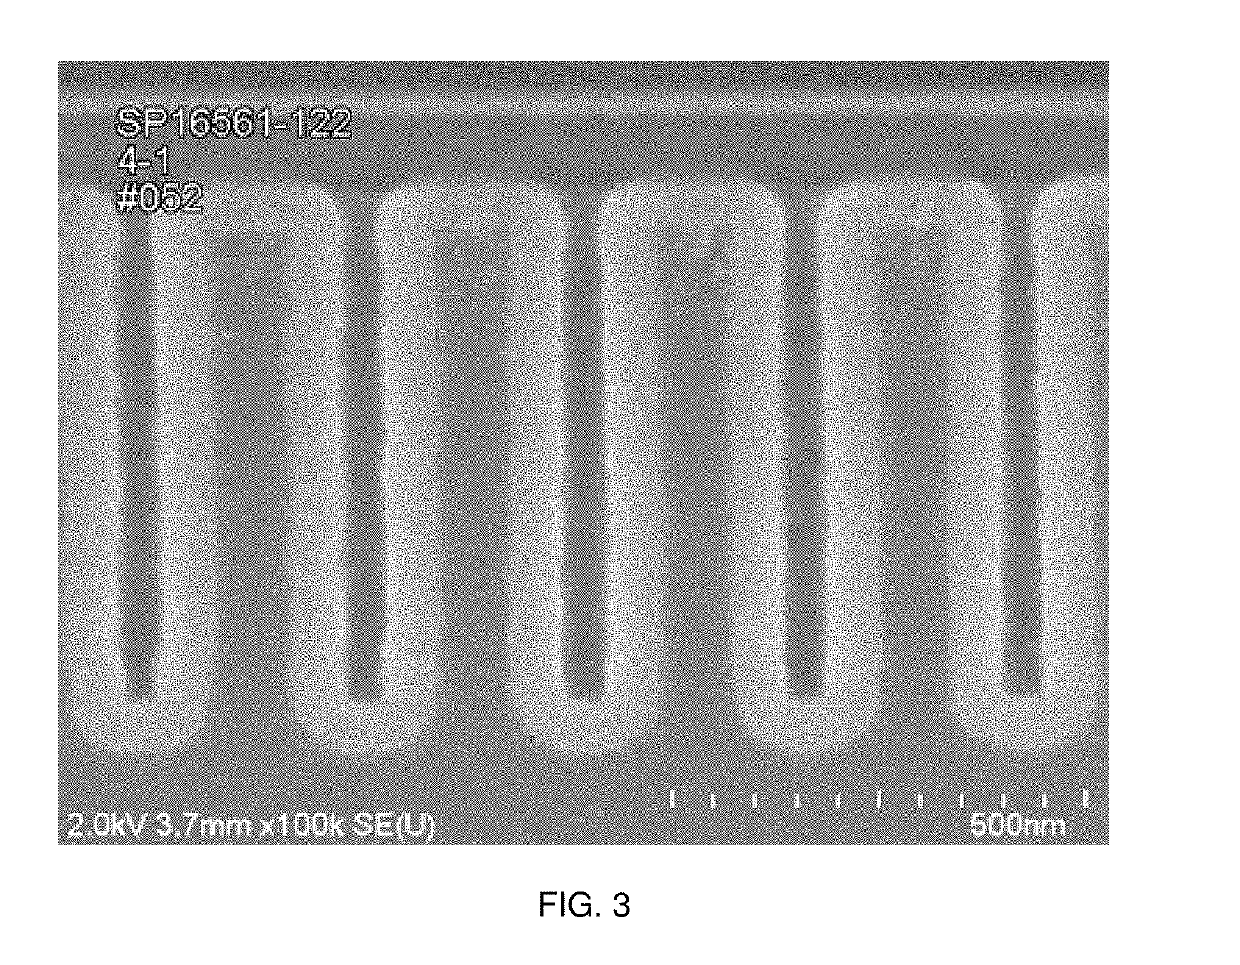 Precursors and flowable CVD methods for making low-K films to fill surface features